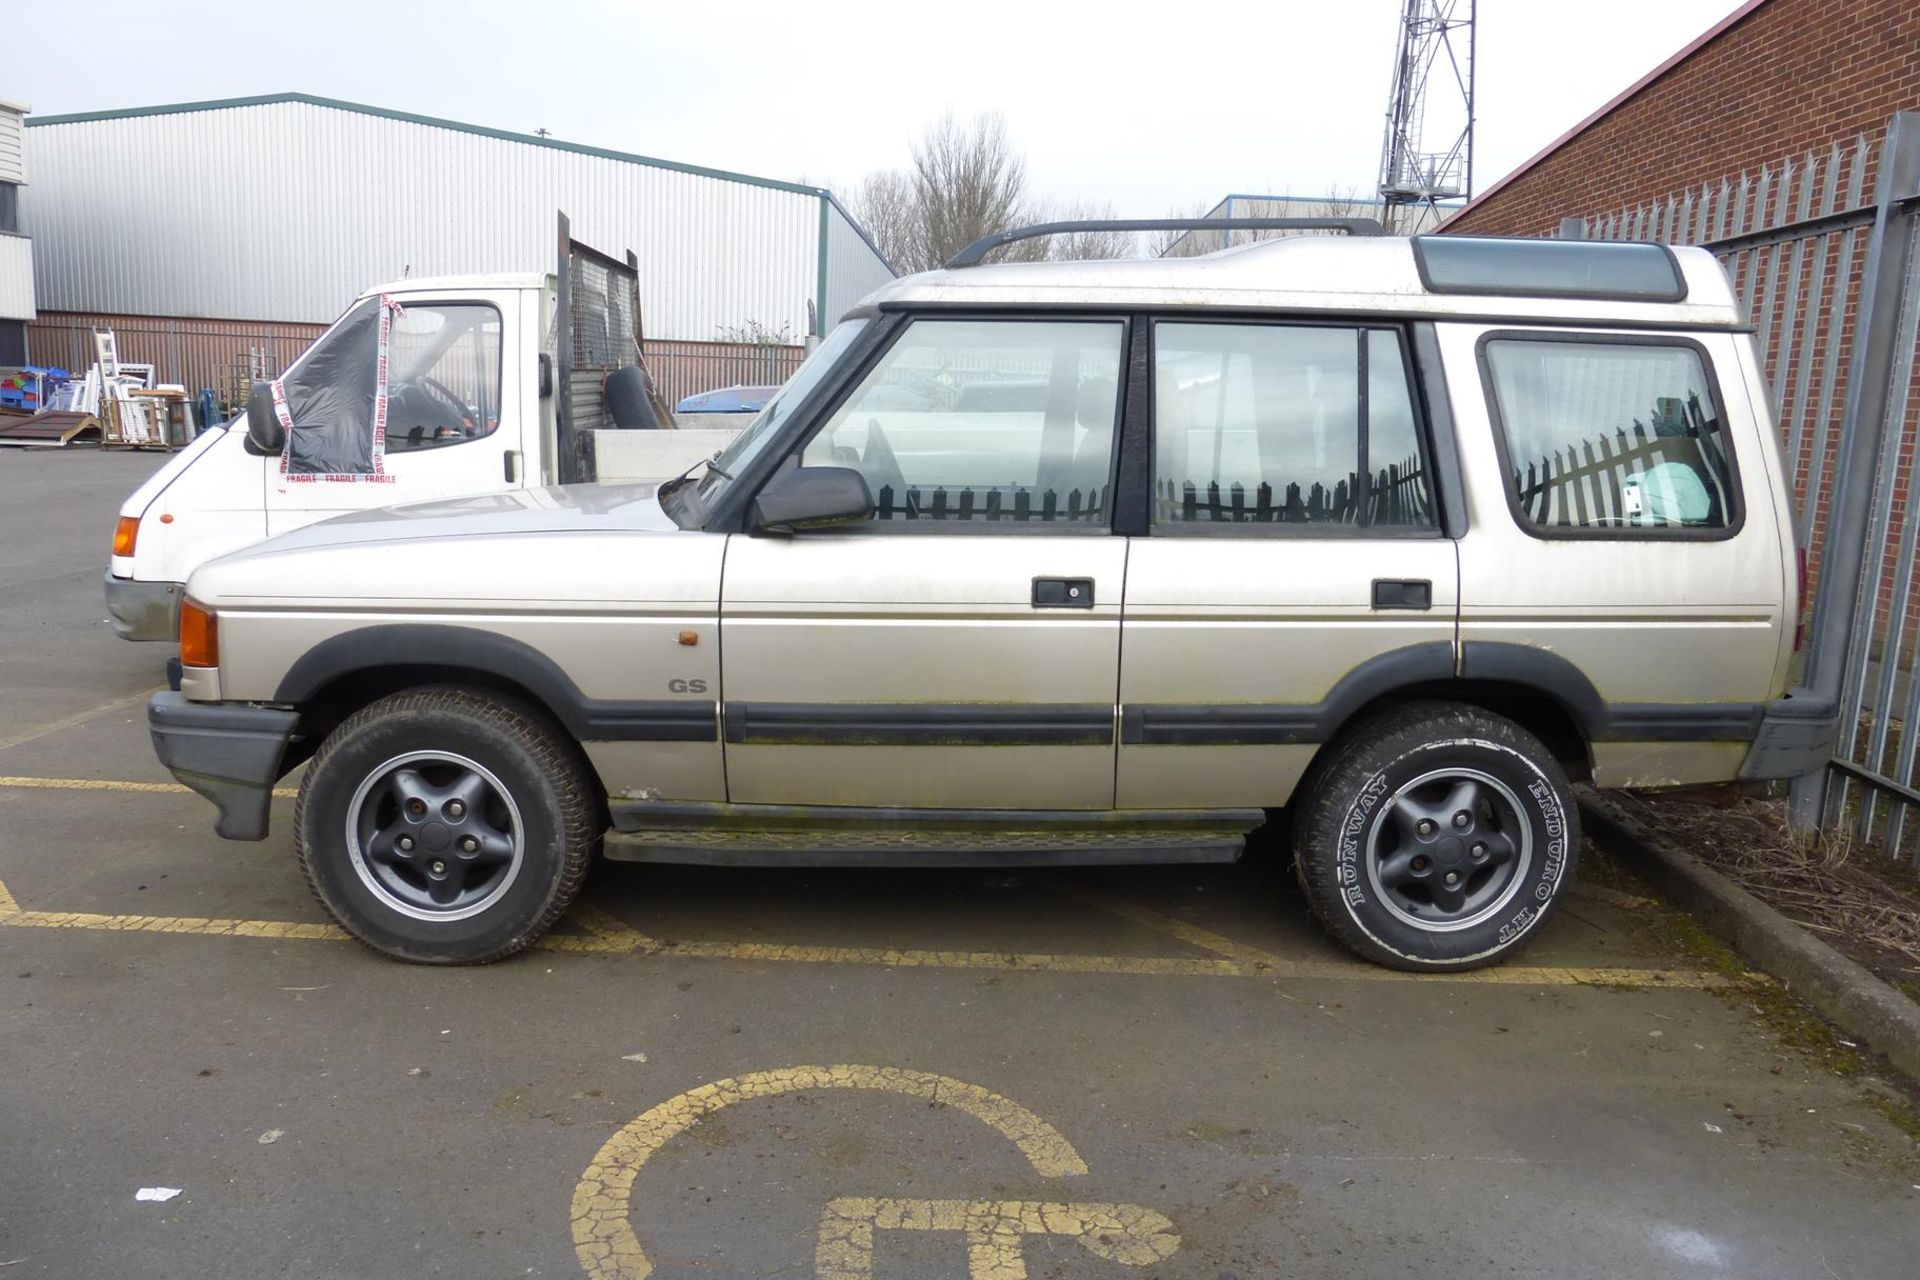 A Land Rover Discovery in Gold 2495cc Diesel Automatic, Date of First Registration March 1998, - Image 3 of 13